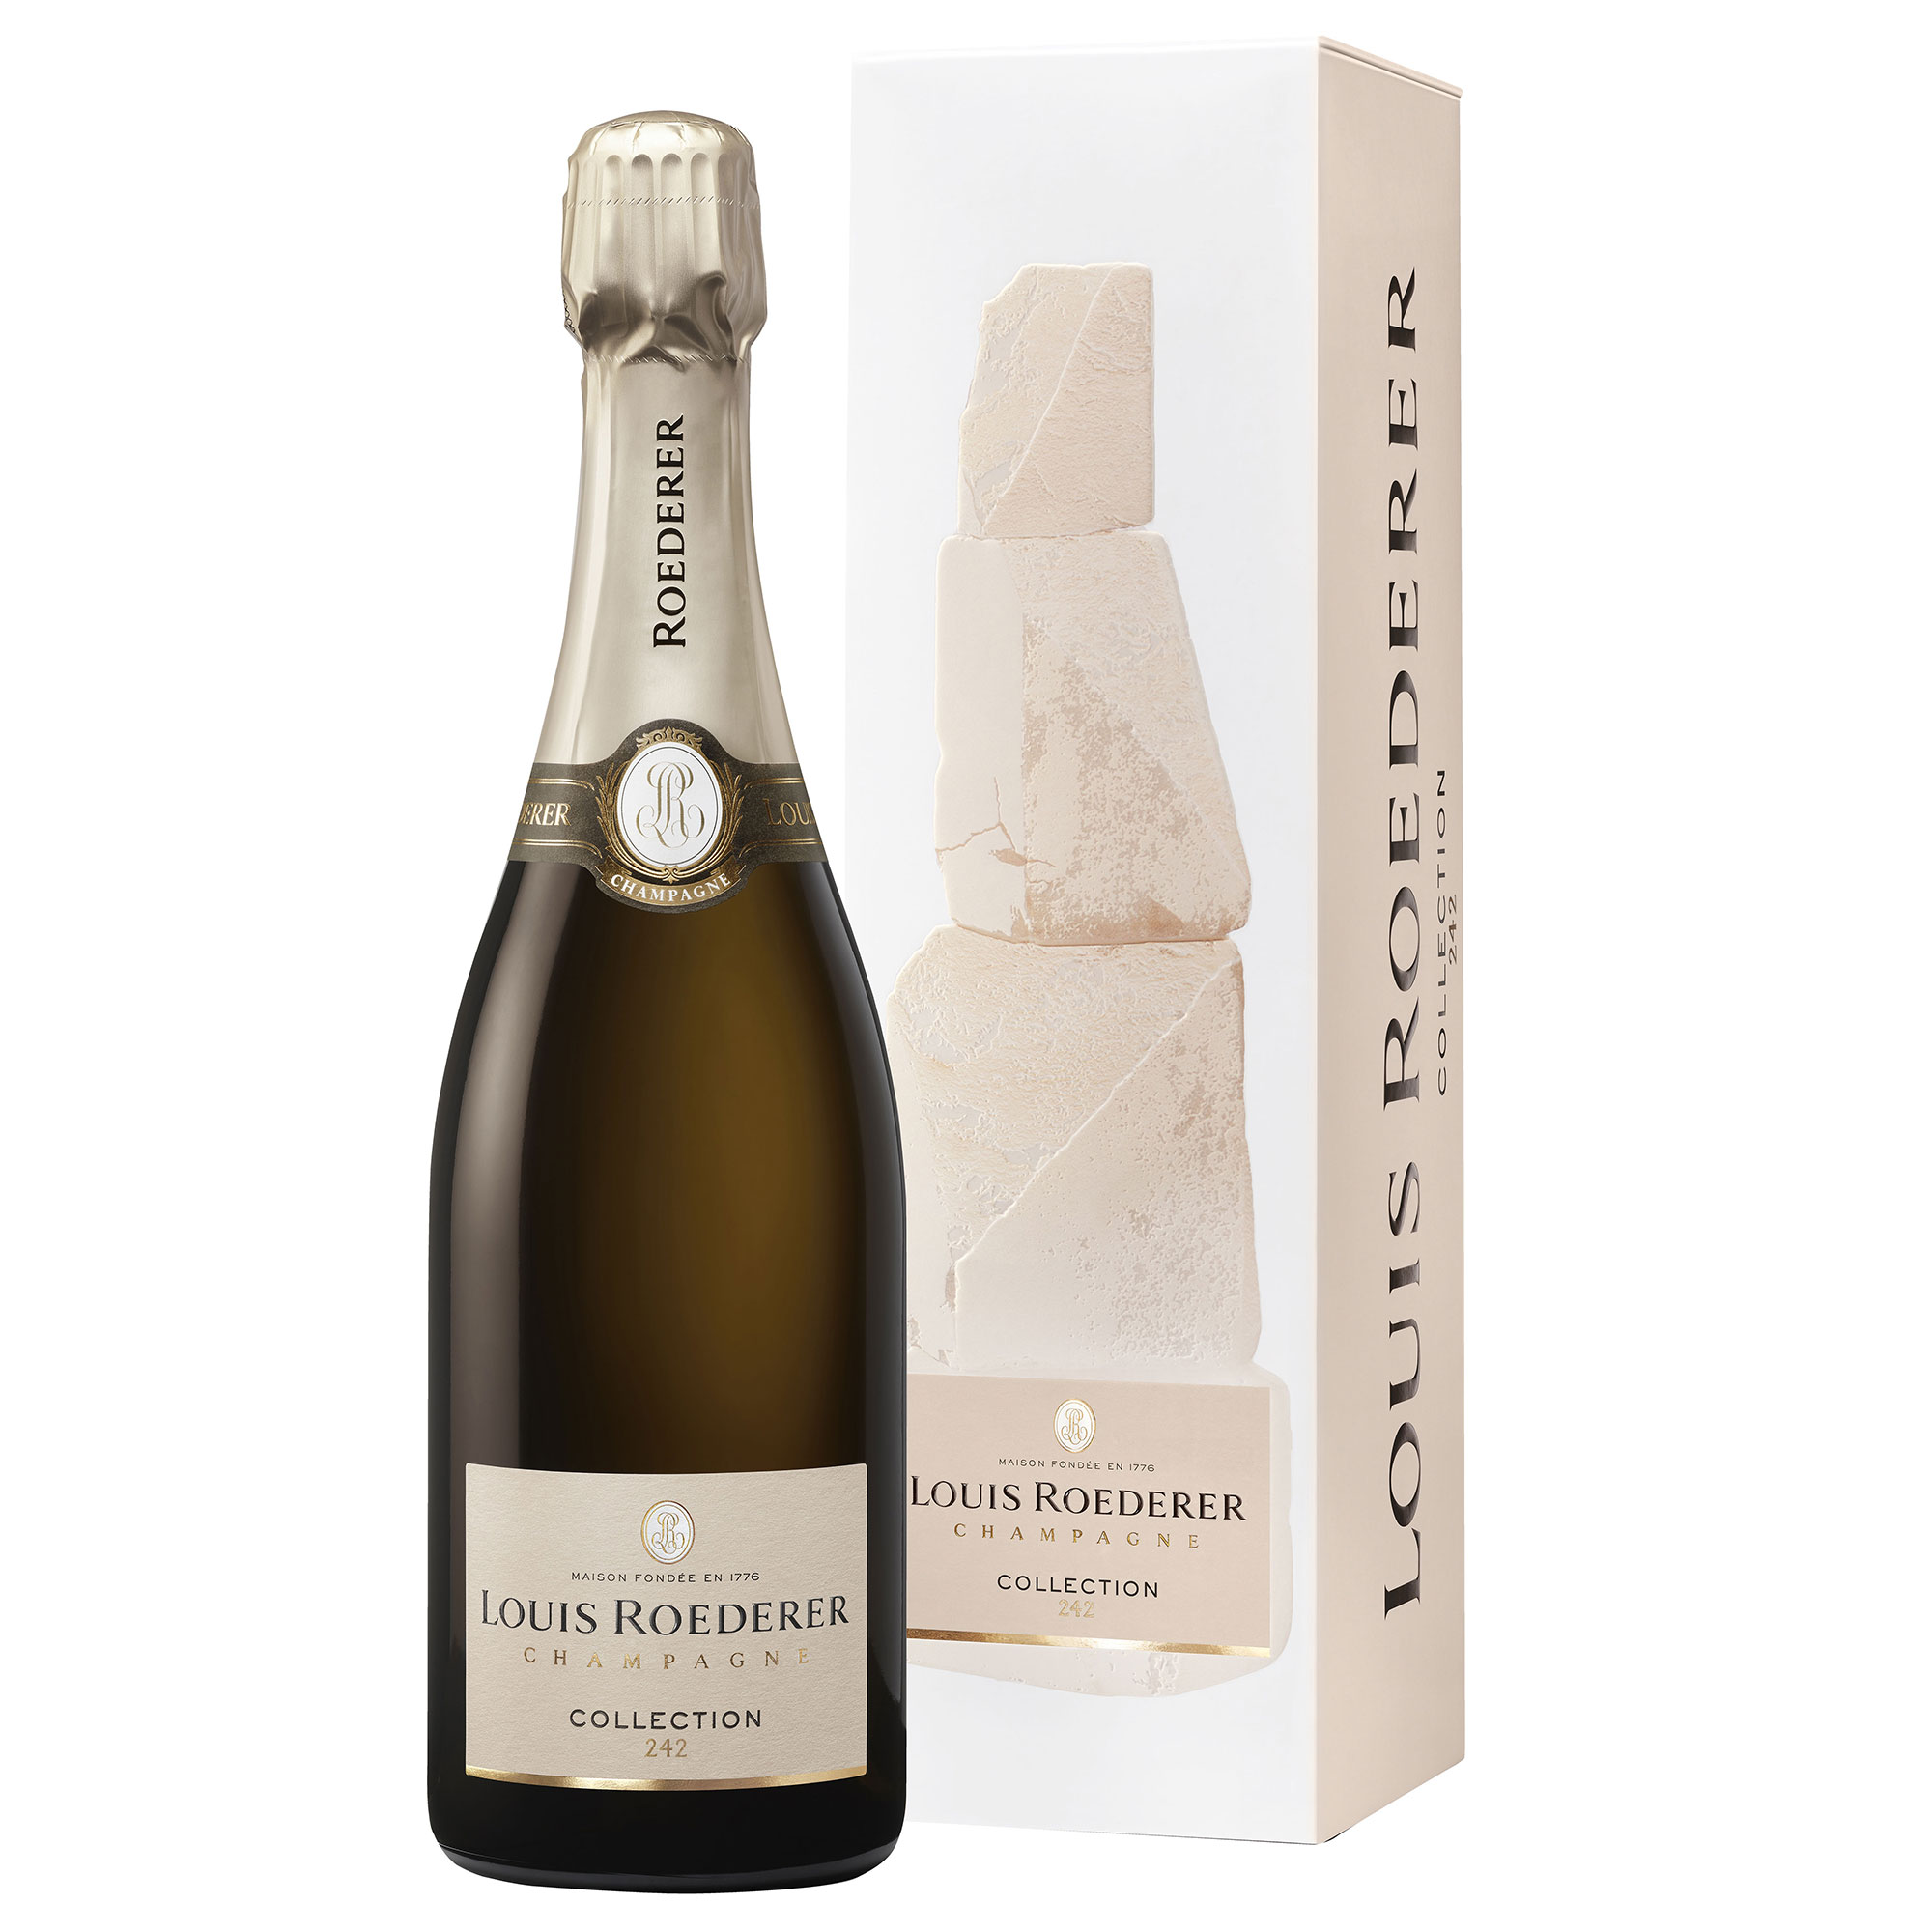 Buy online - Louis Roederer Collection 242 Champagne 75cl Gift Boxed